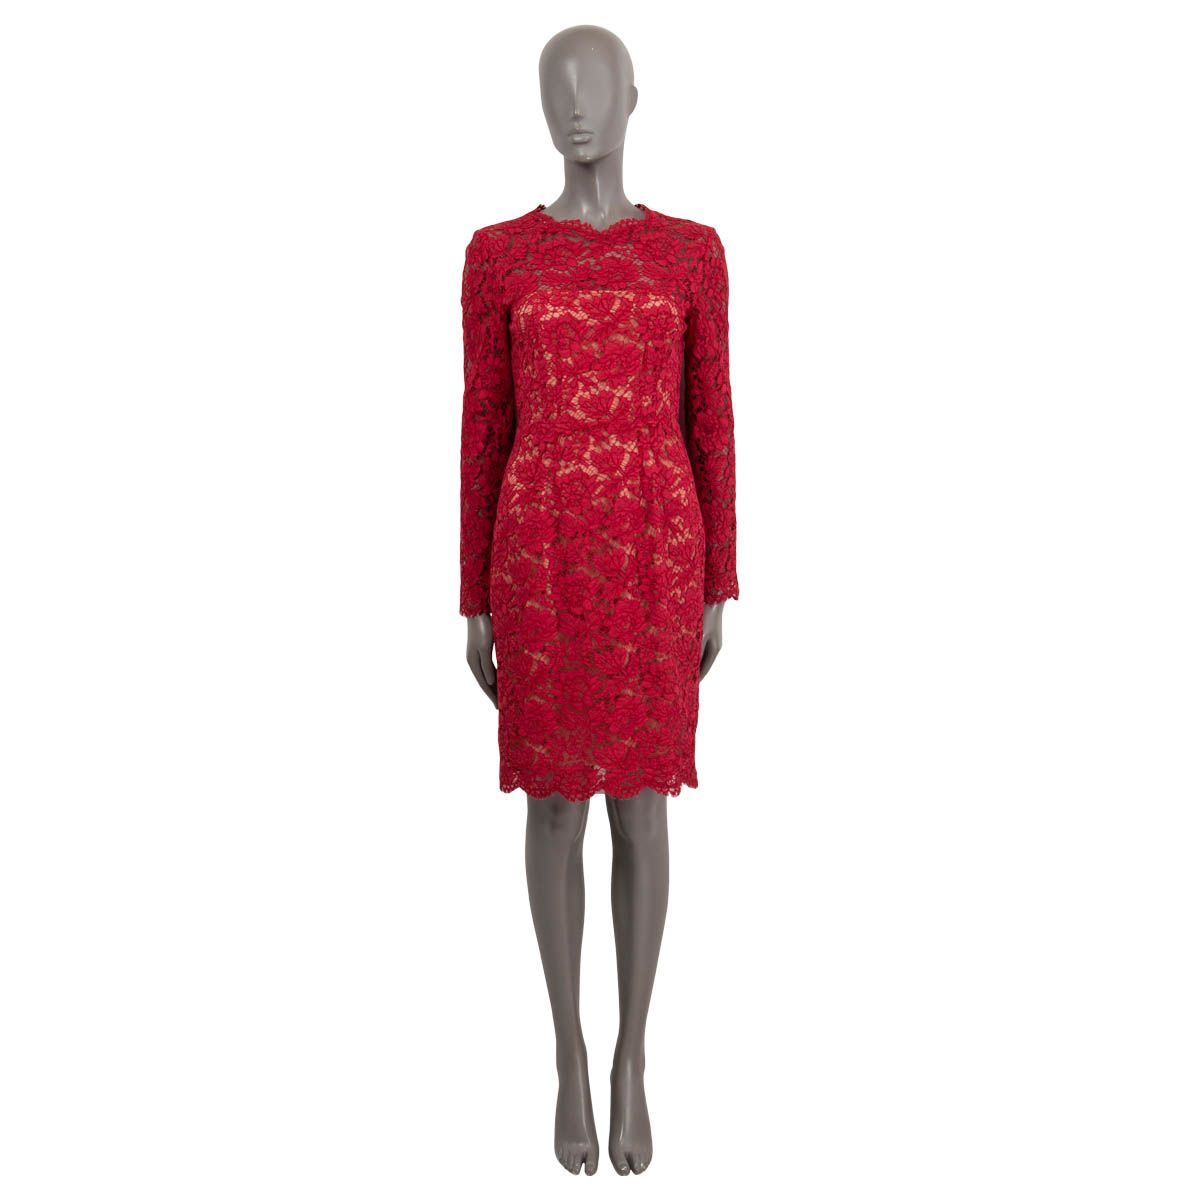 Floral Giupure Lace Sleeve Dress Red Cotton